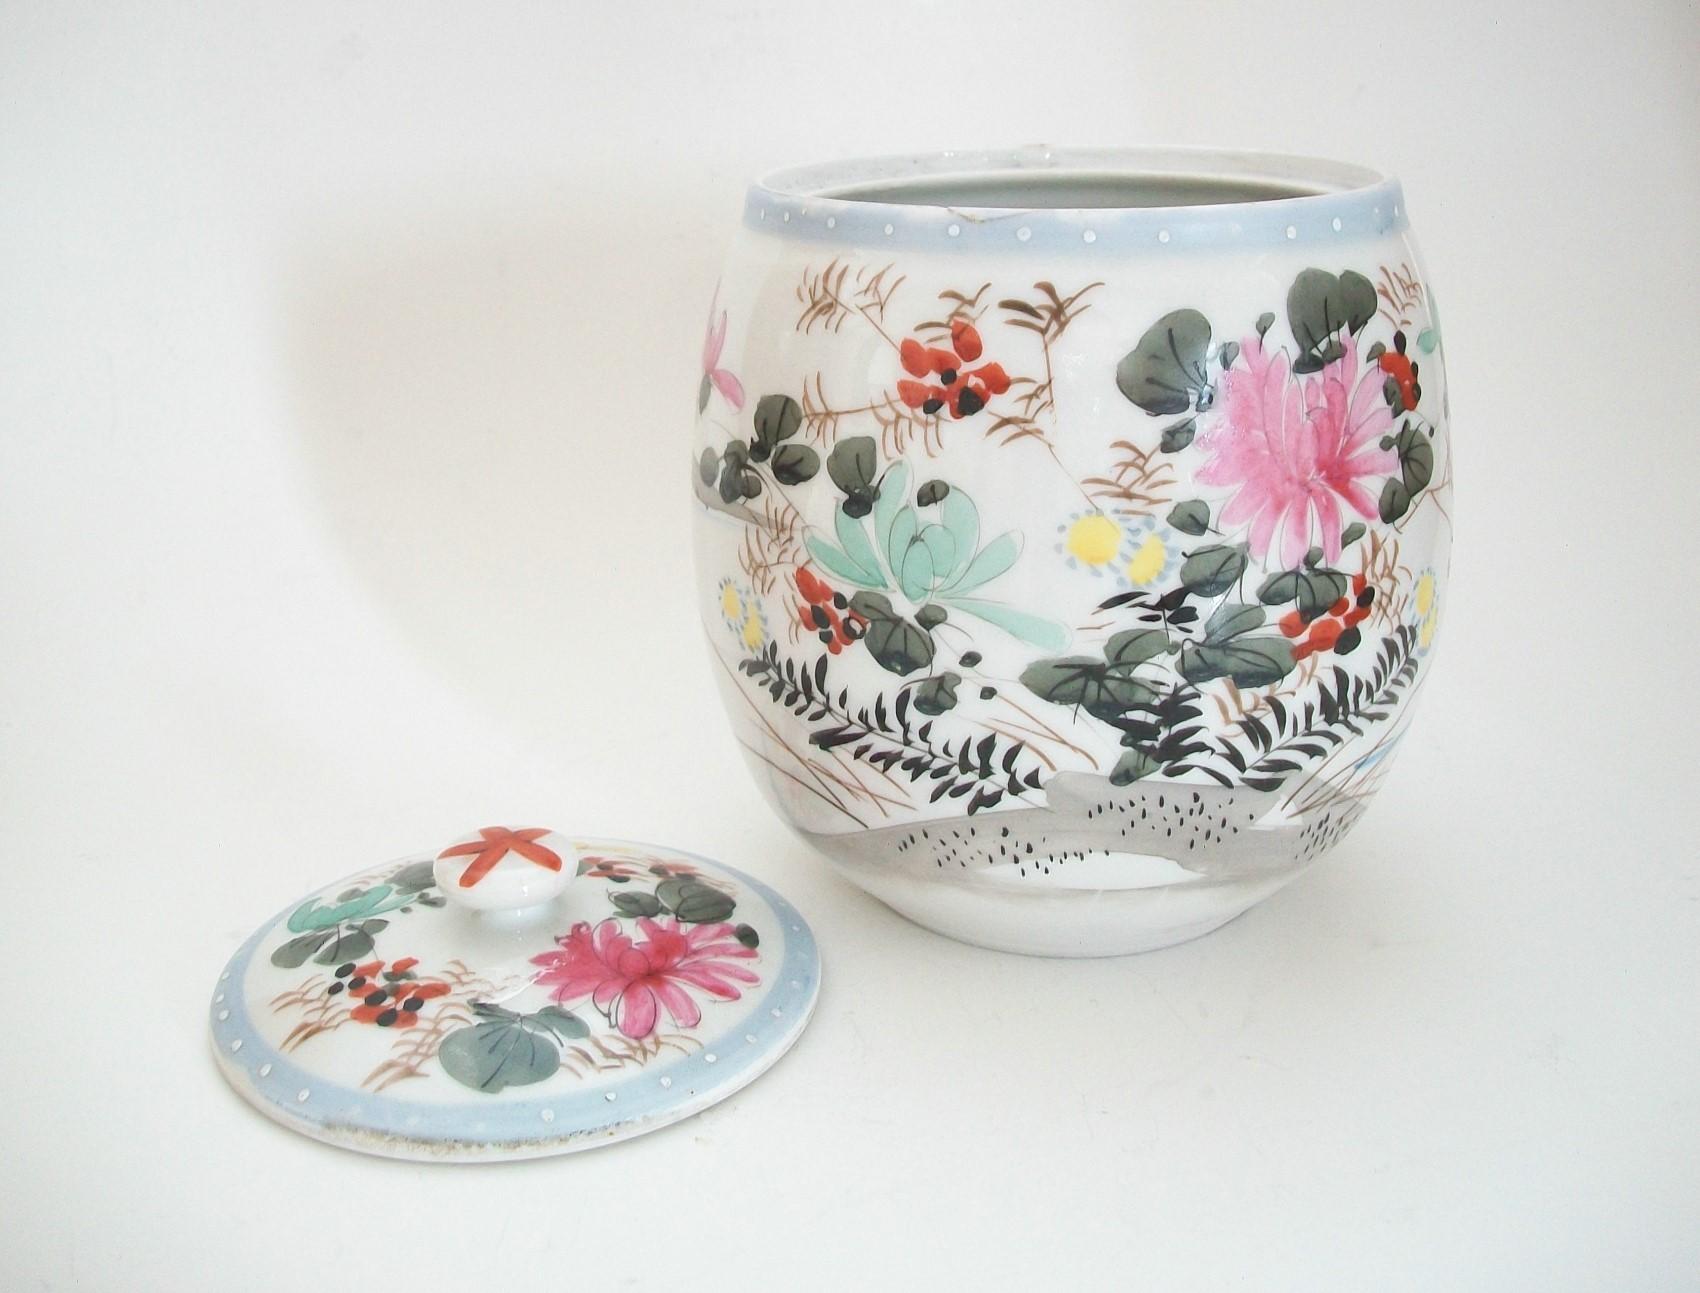 Antique Meiji Wucai Style Porcelain Jar & Cover, Japan, Early 20th Century For Sale 3